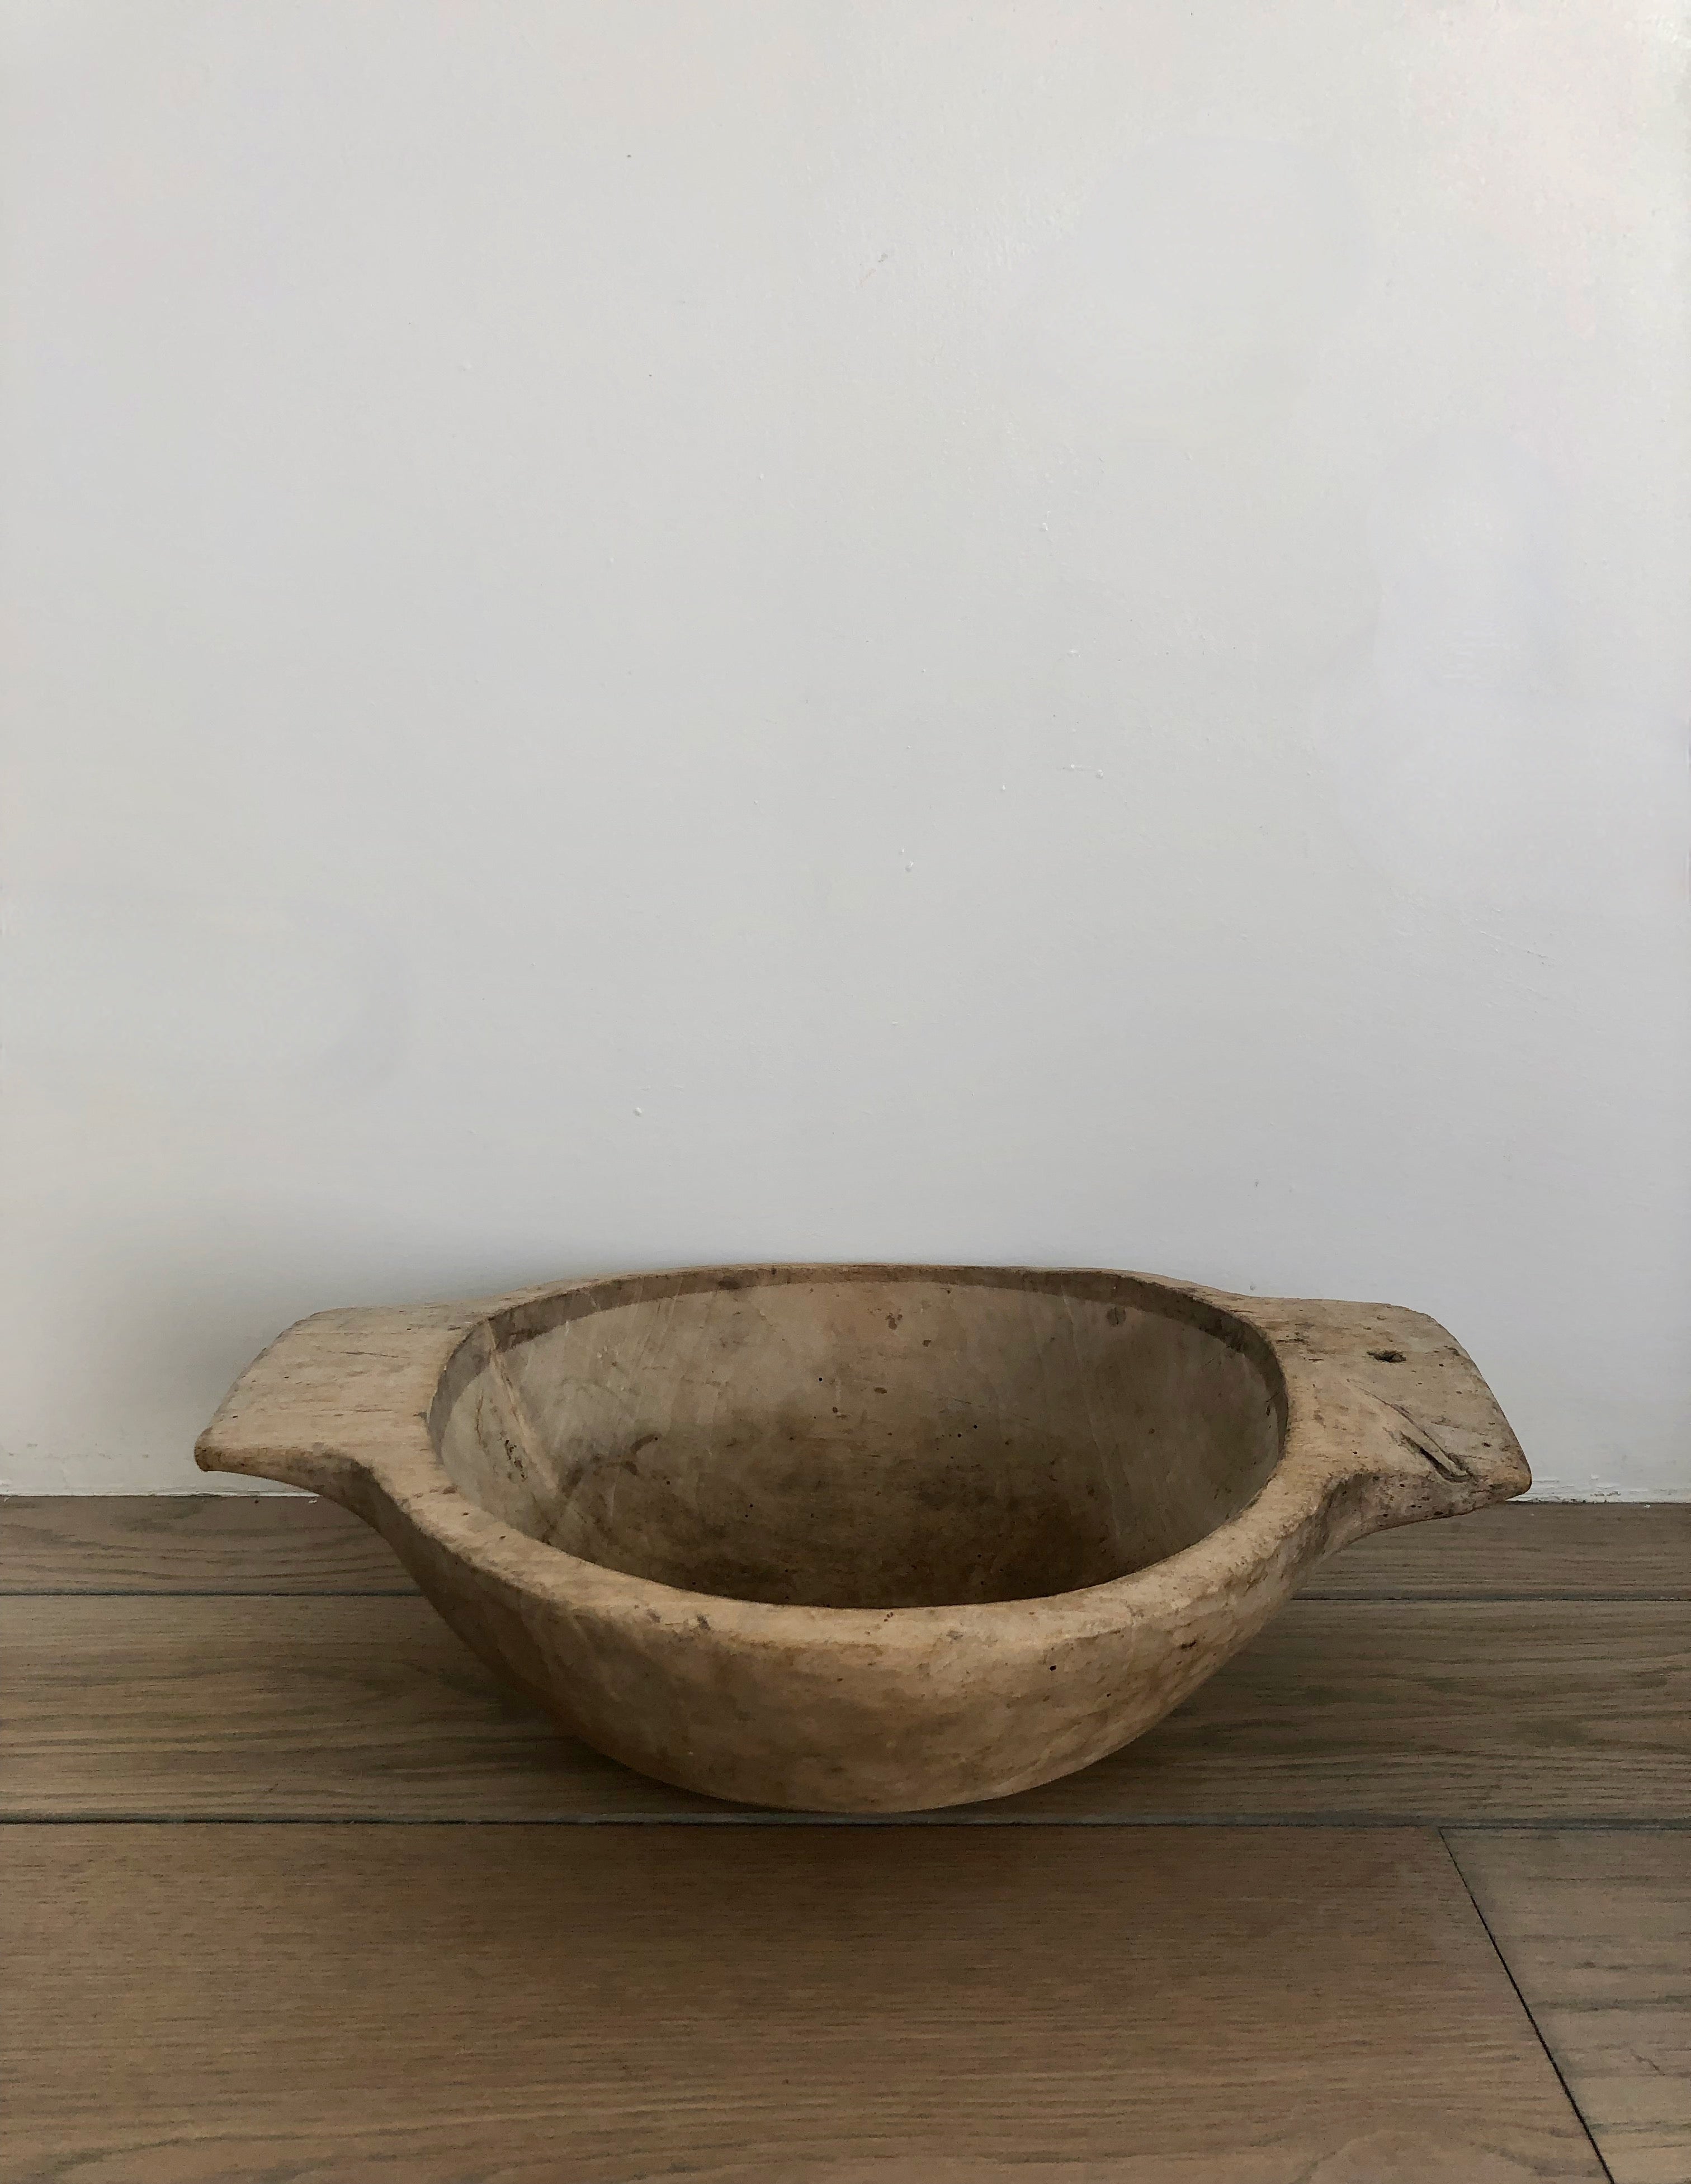 Vintage French trencher bowl with round shallow base and  handles at sides.